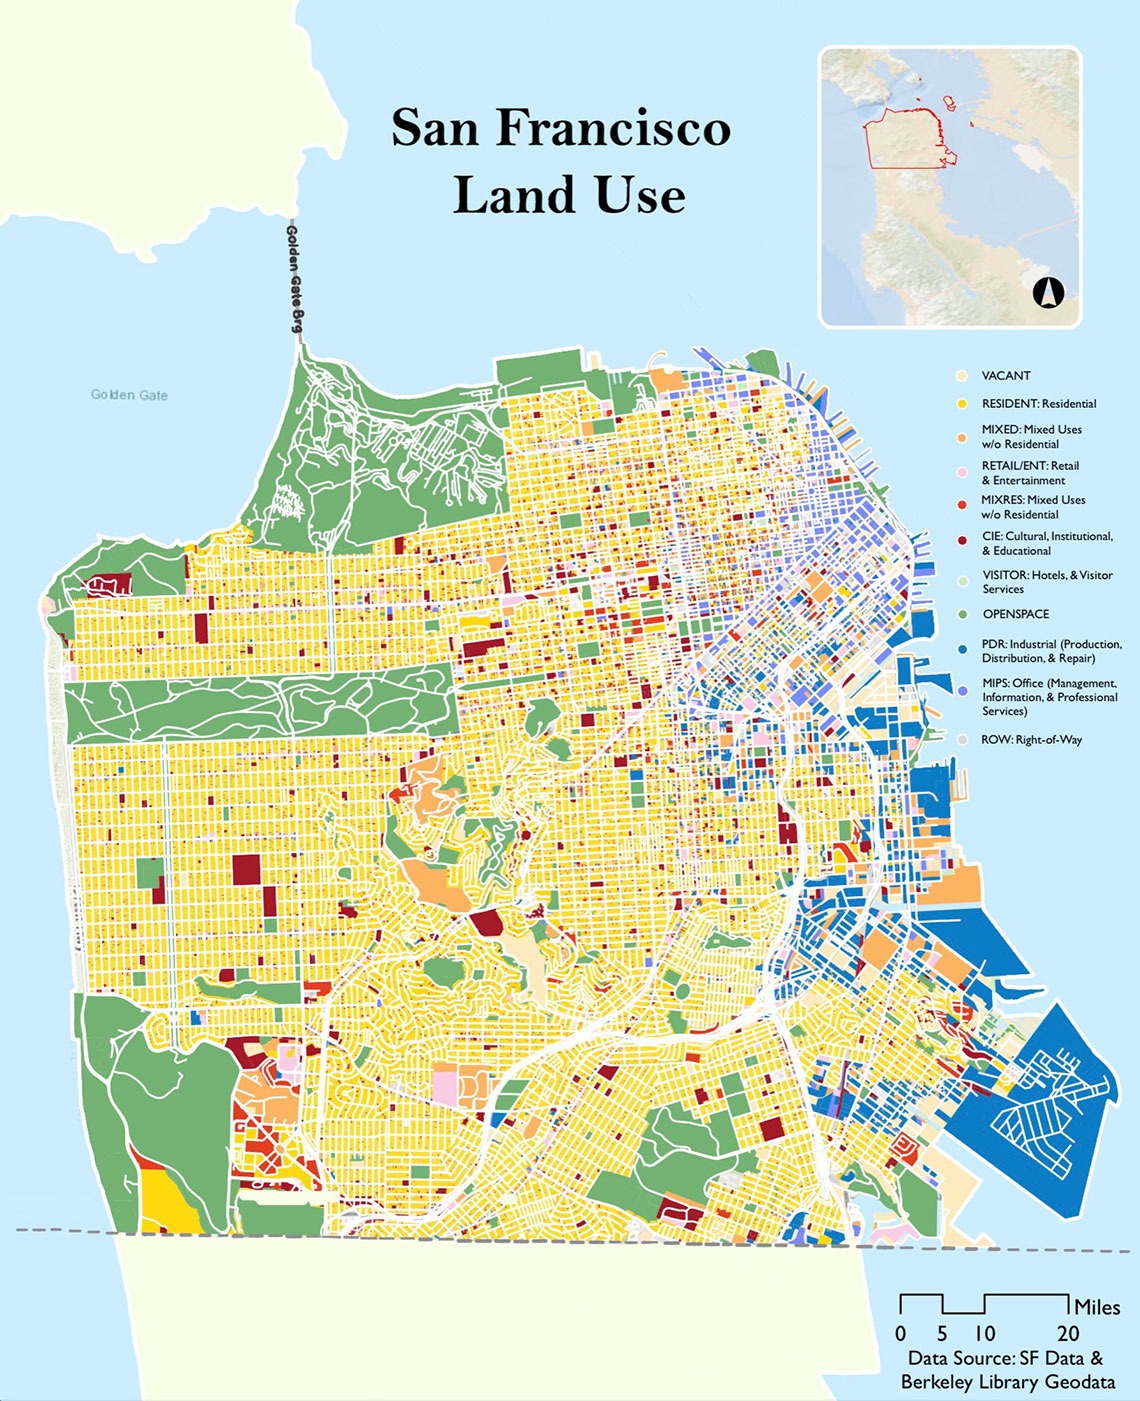 San Francisco Land Use Map, by Isabelle Loh